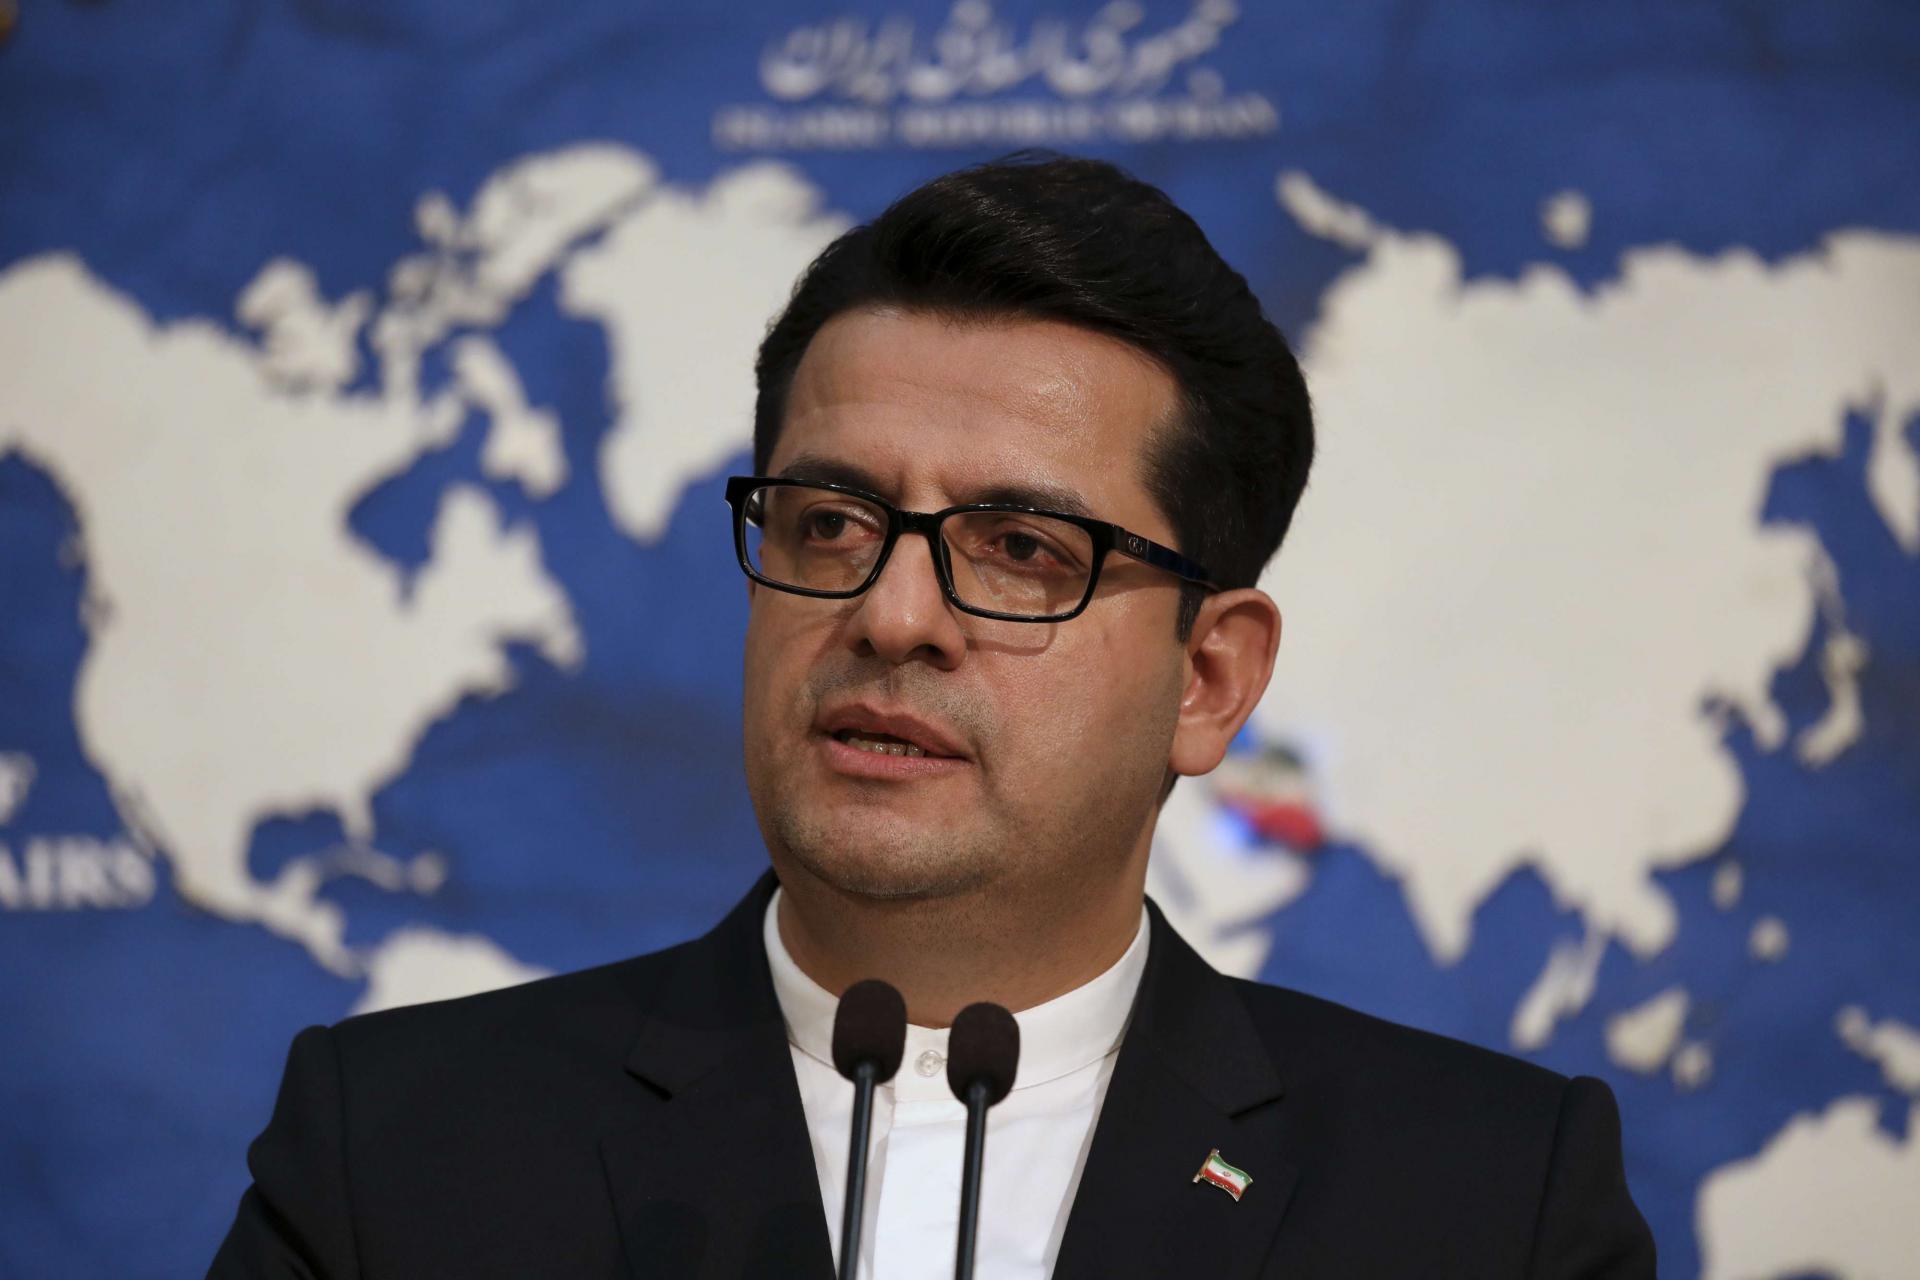 Iranian foreign ministry spokesman Abbas Mousavi, speaking on state TV, dismissed the US allegation as "pointless"